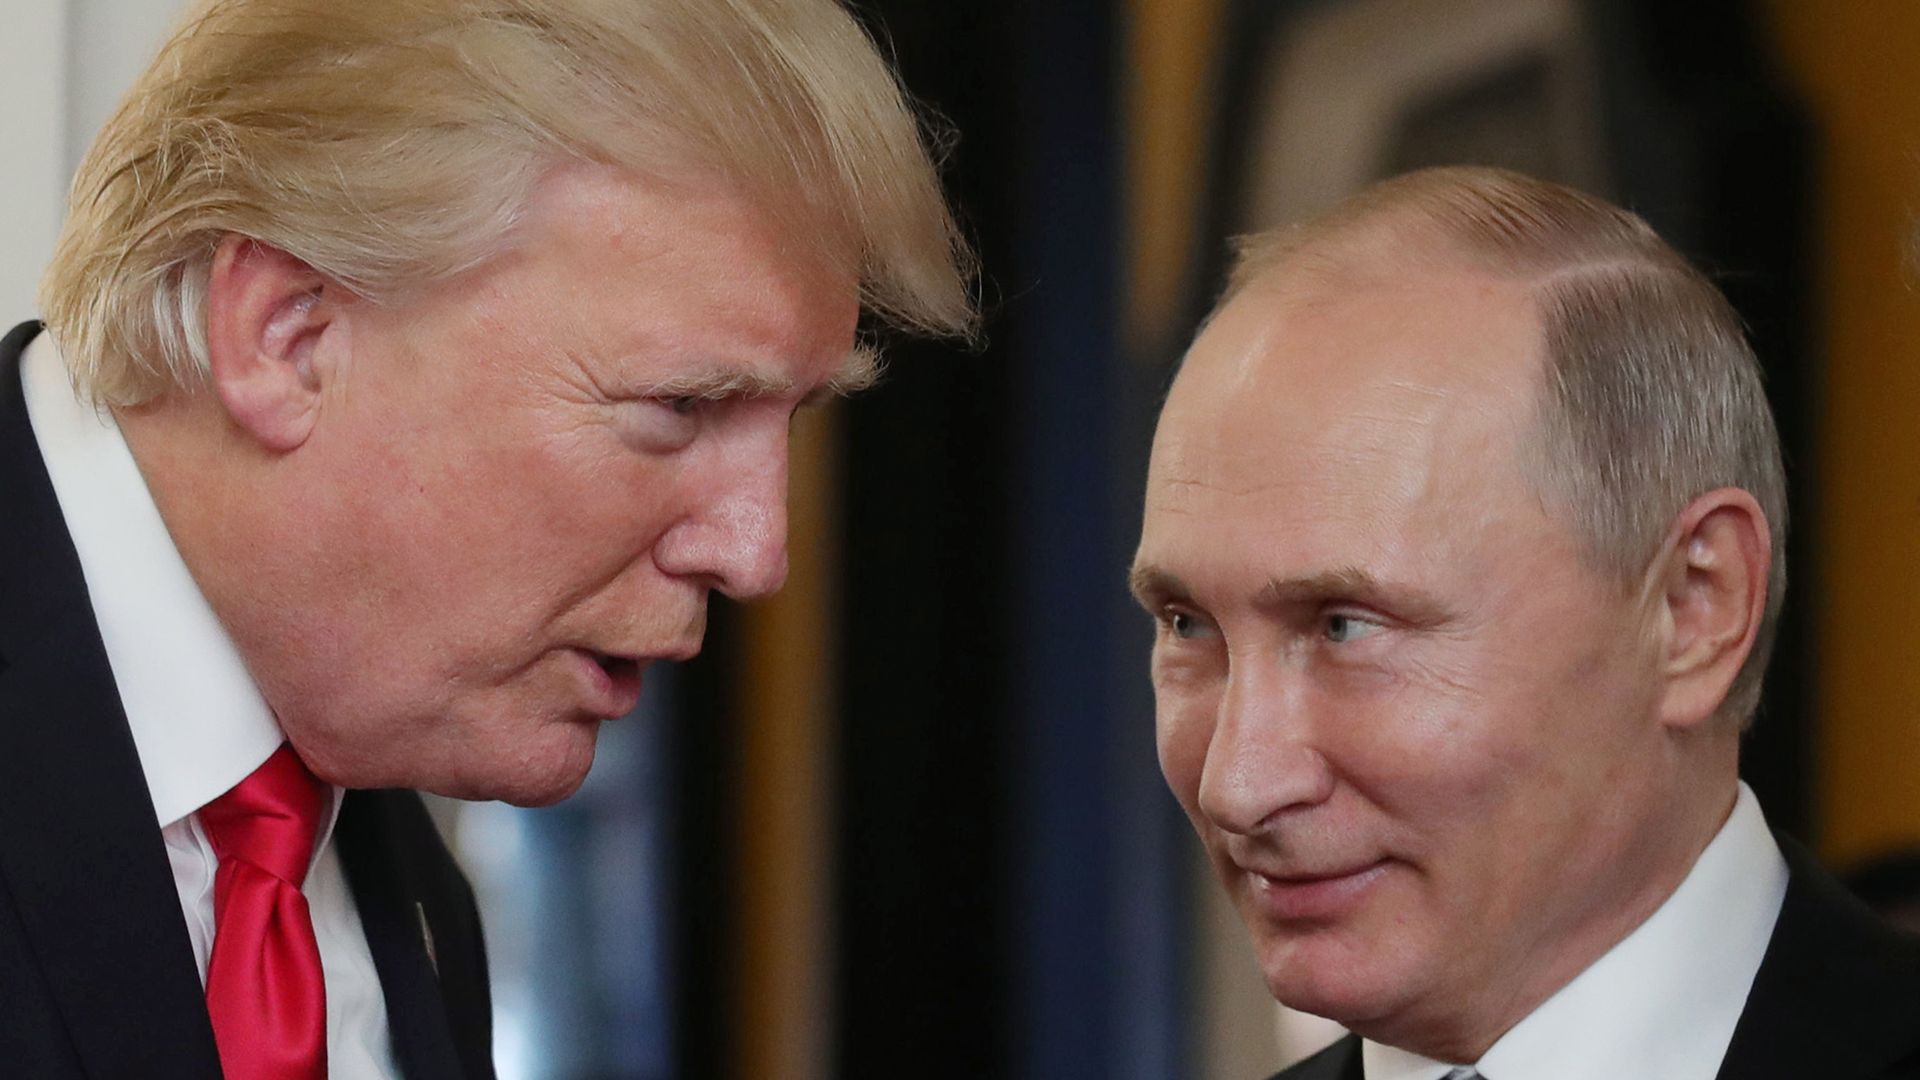 Trump and Putin facing each other in conversation